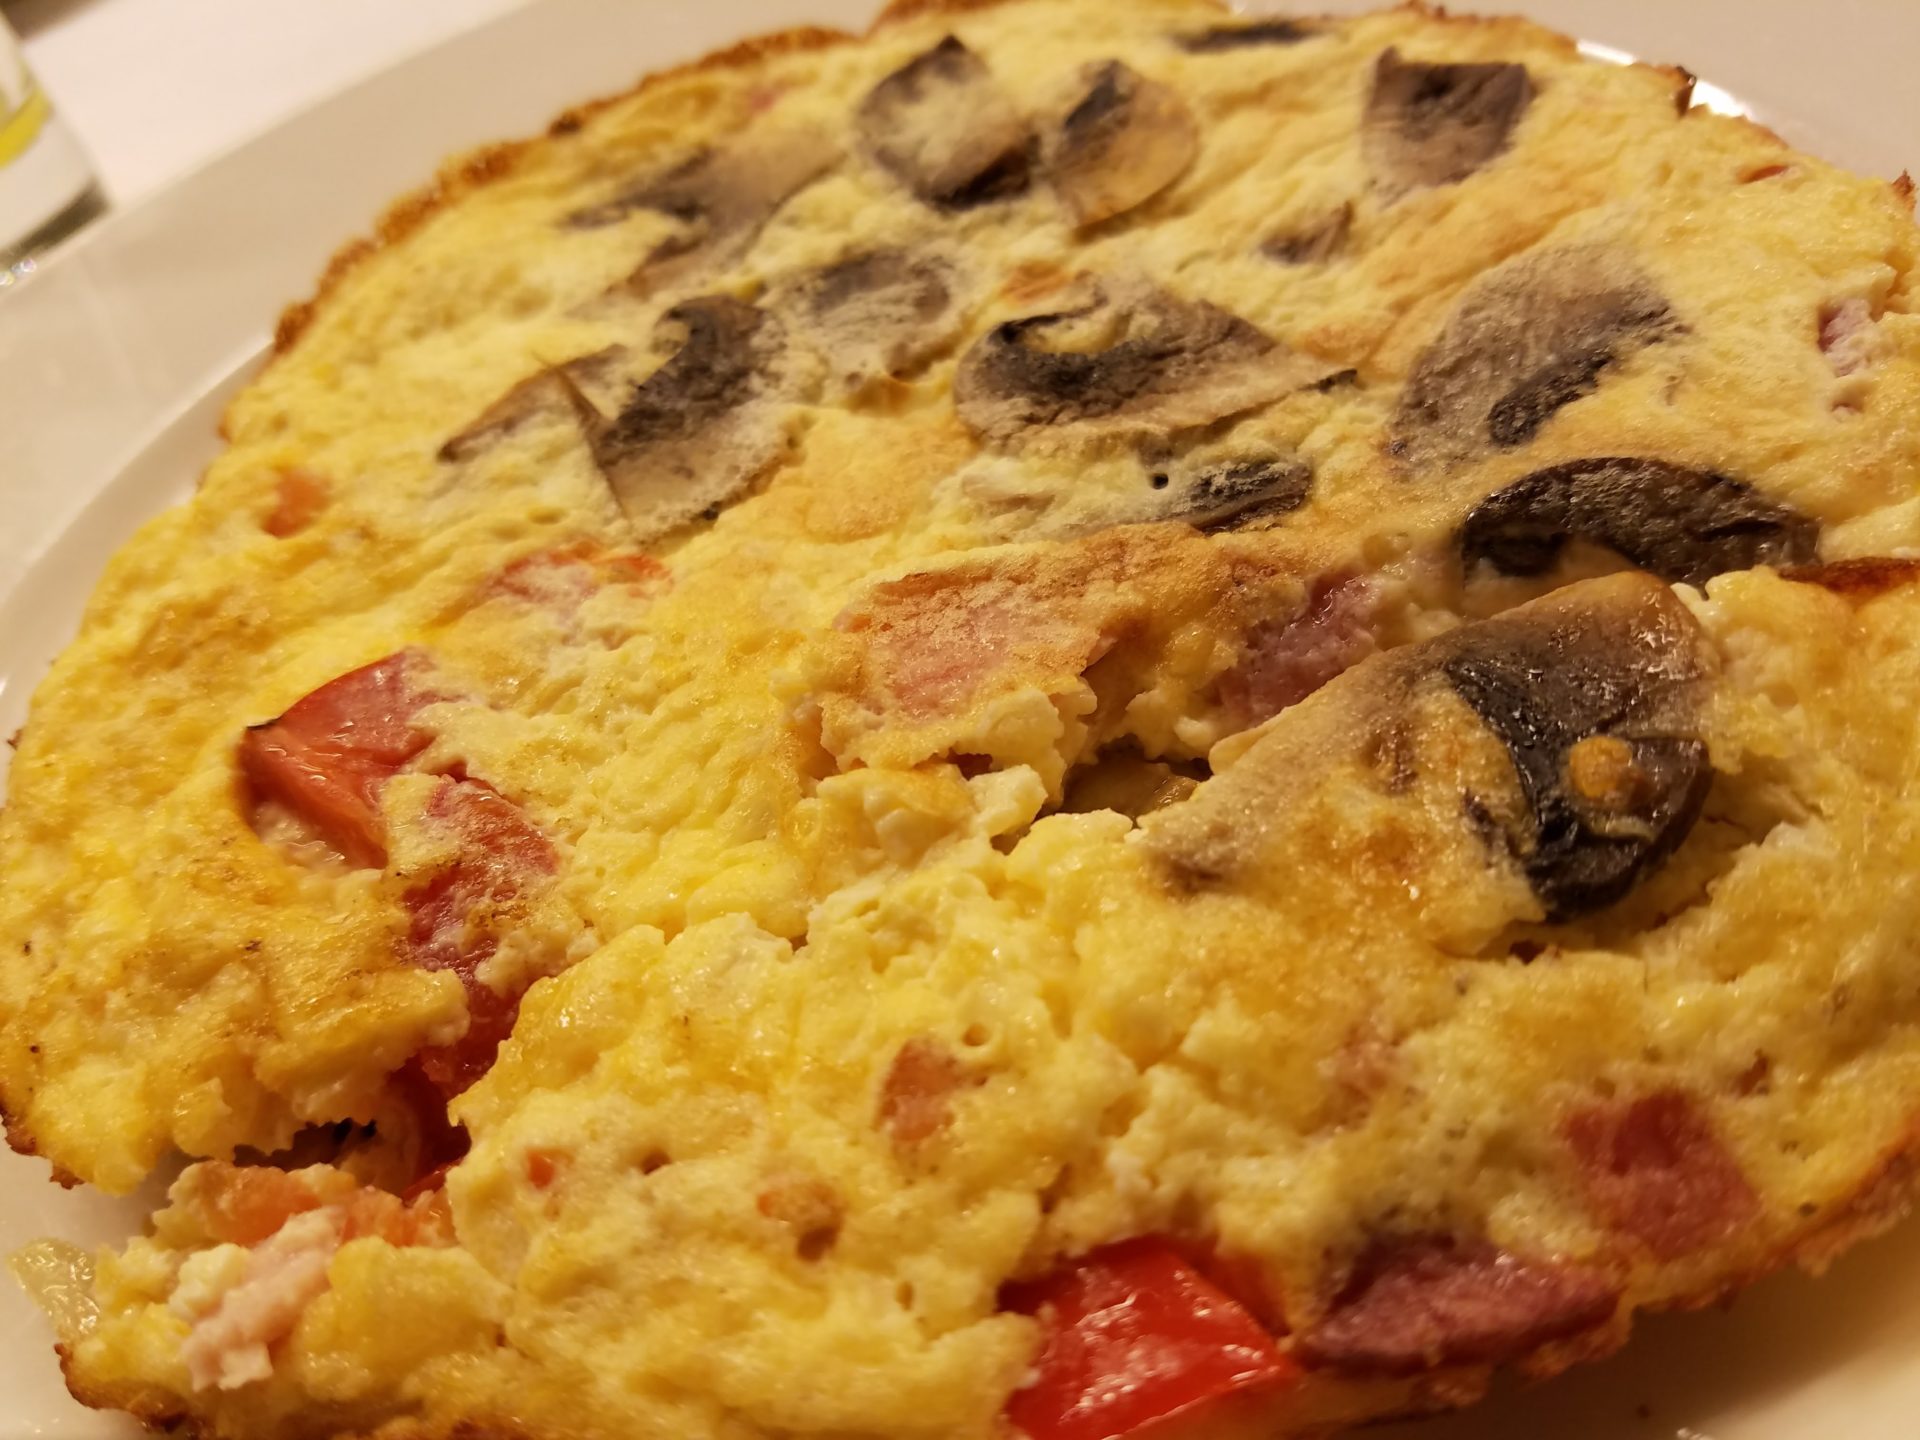 a plate of omelette with mushrooms and tomatoes